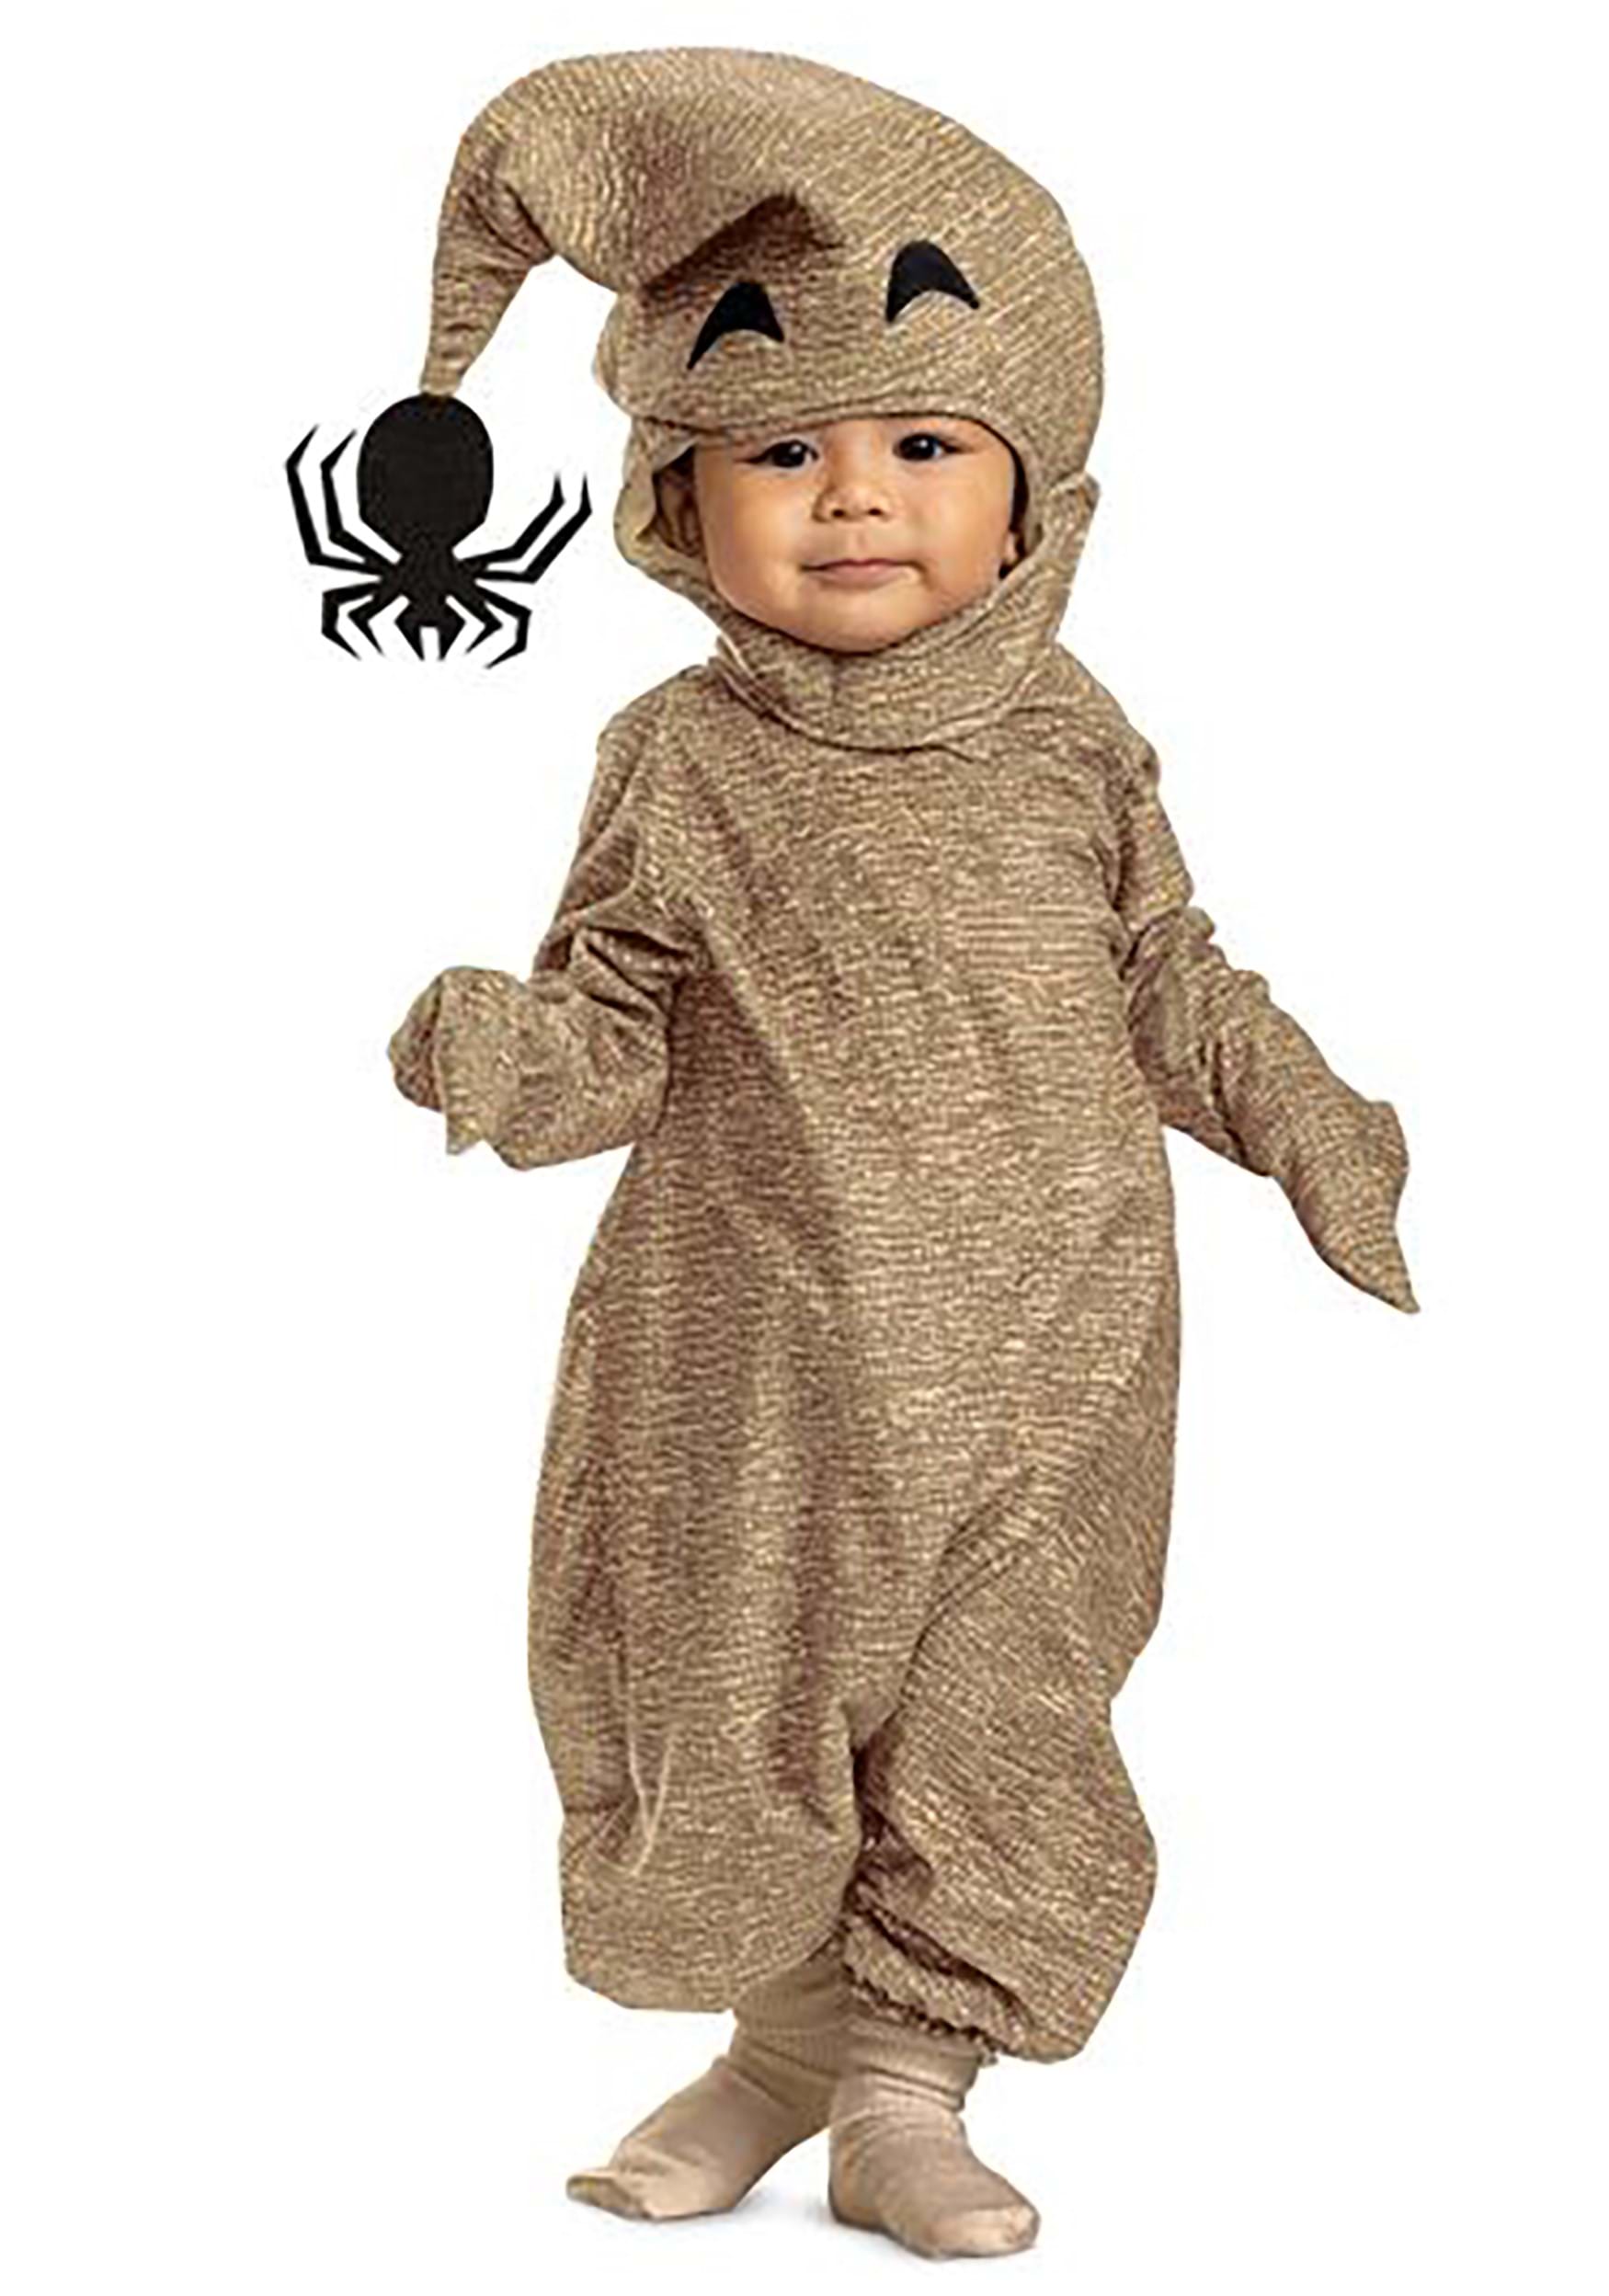 https://images.halloweencostumes.eu/products/83764/1-1/nightmare-before-christmas-oogie-boogie-posh-infant-costume.jpg